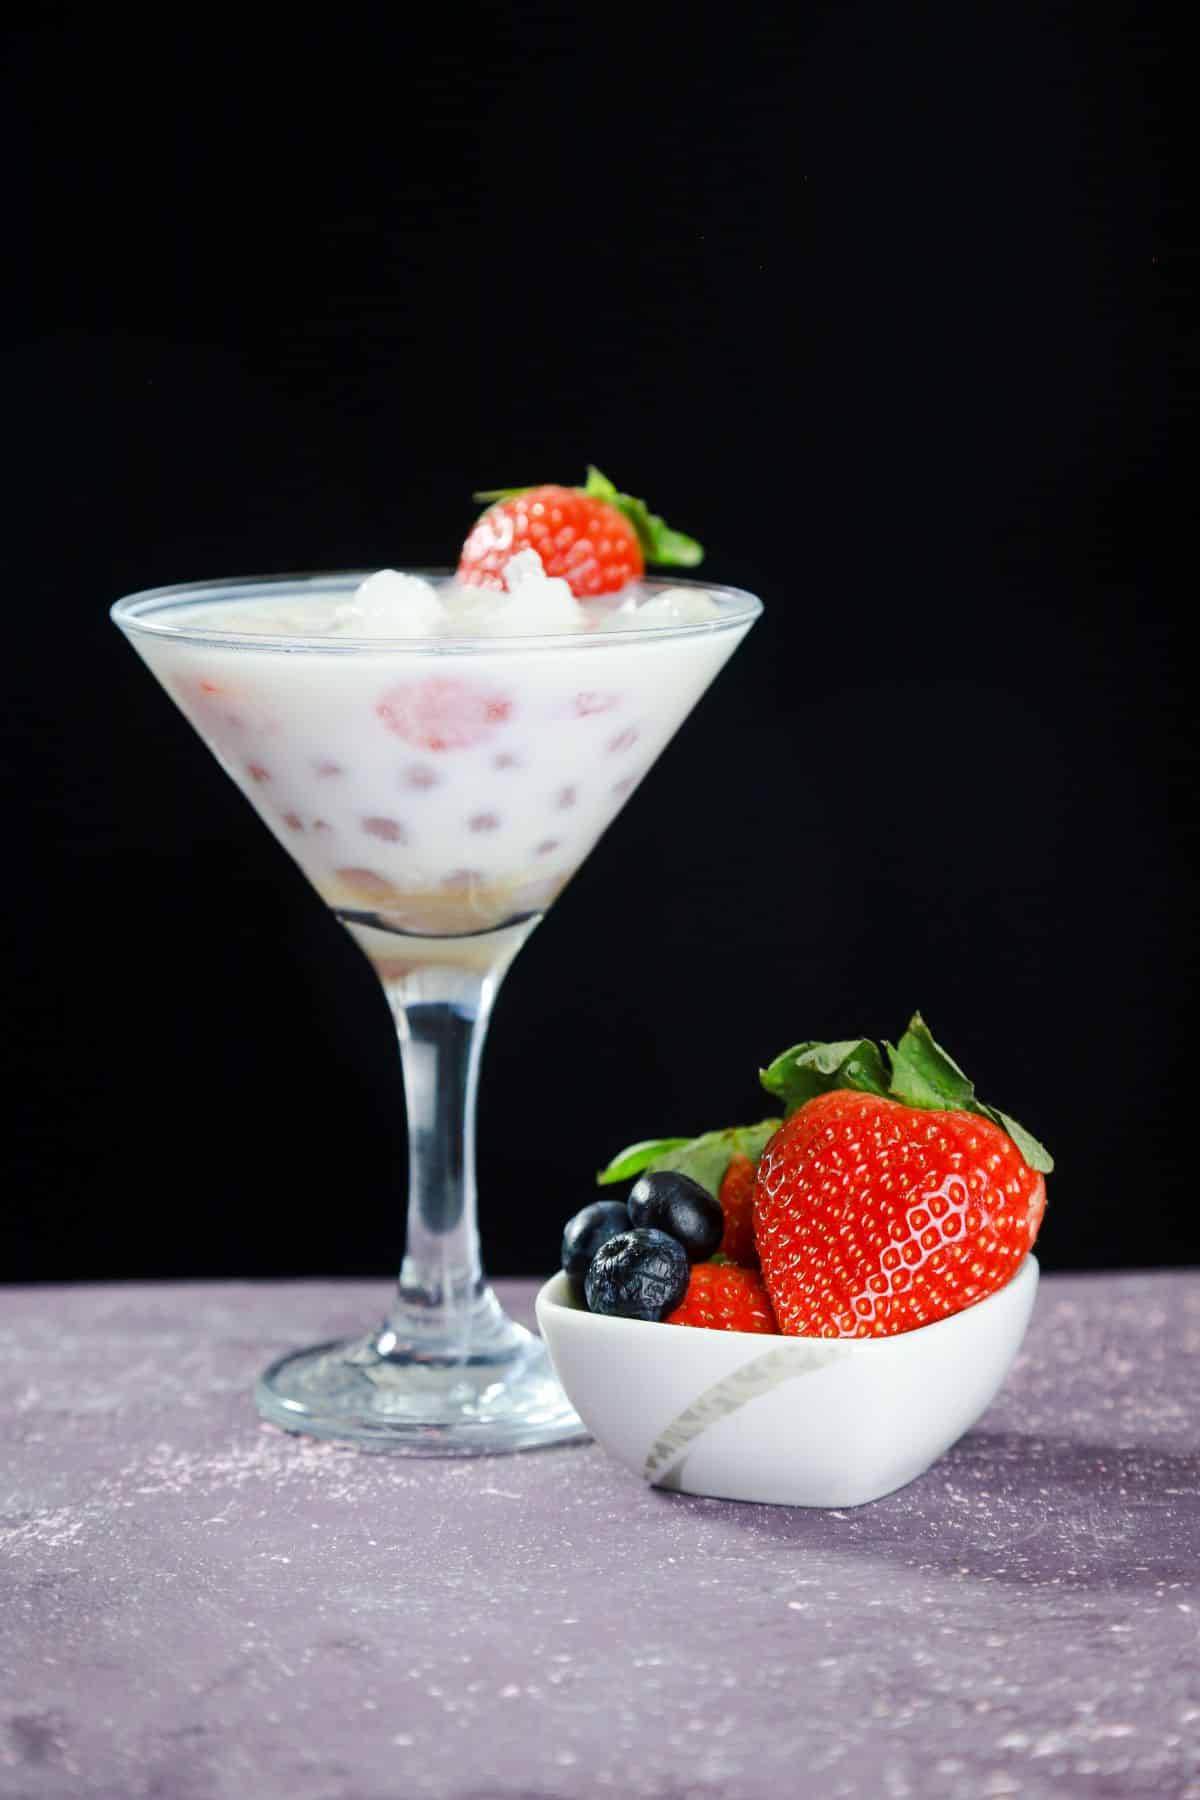 strawberry pieces on top of boba milk in martini glass on gray table